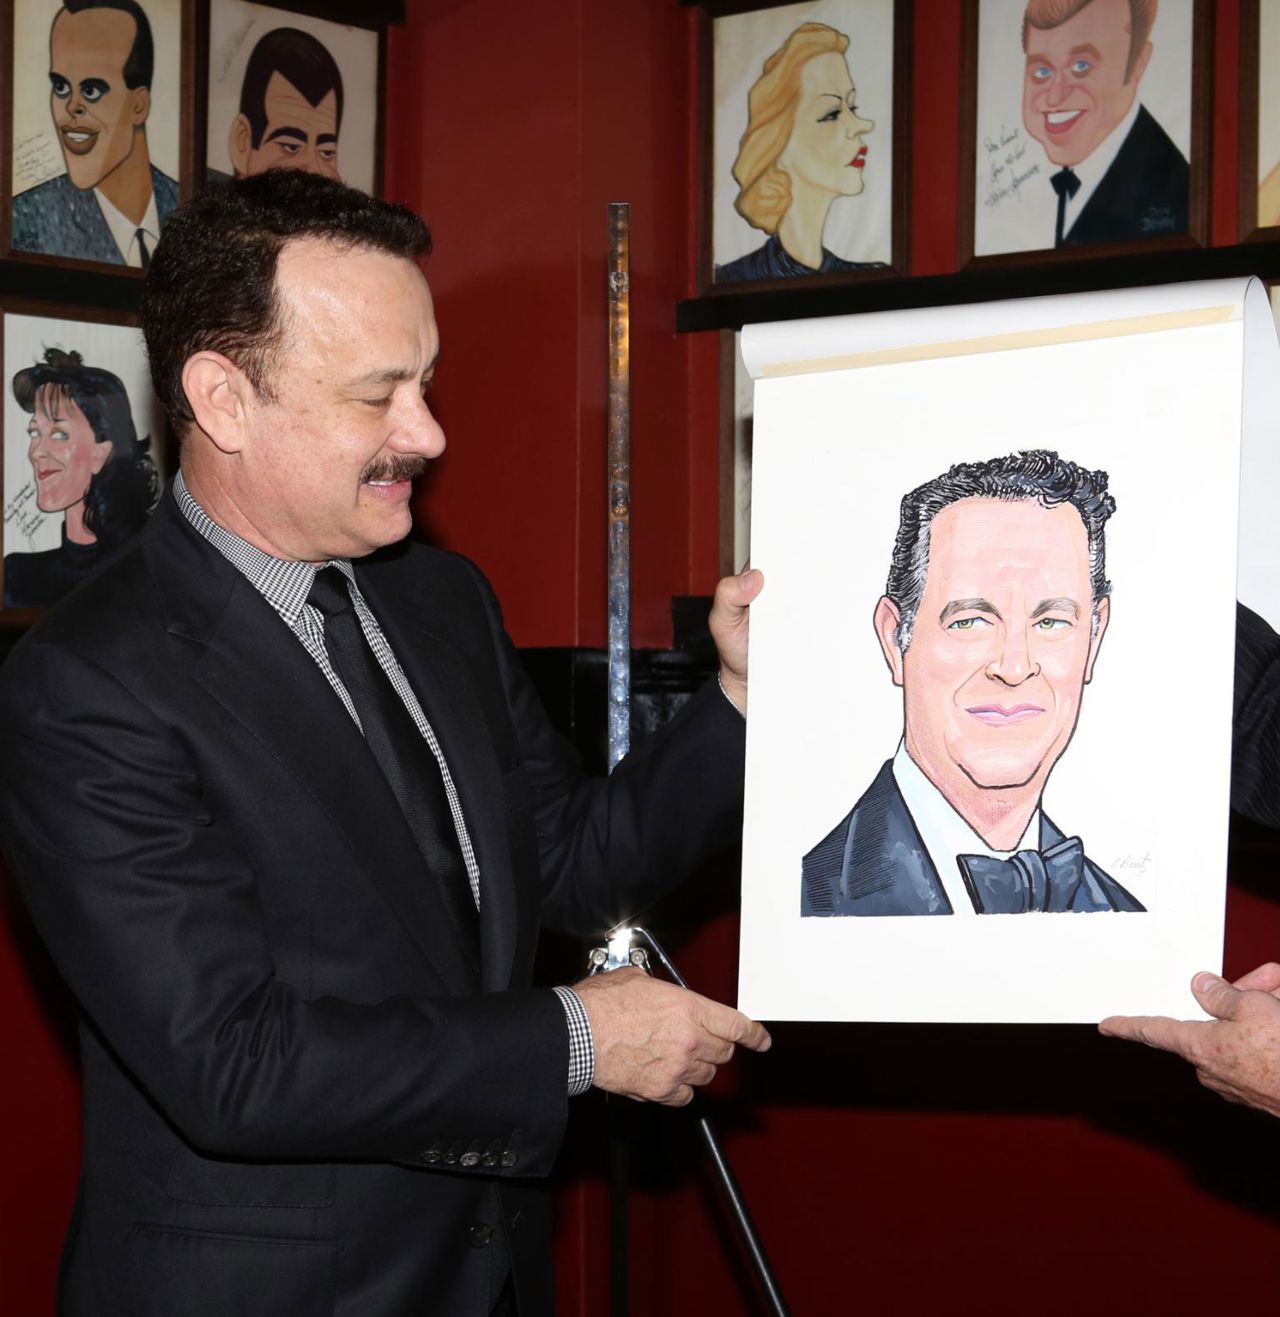 Hanks looks at his caricature after it was unveiled at Sardi's restaurant in New York in 2013.